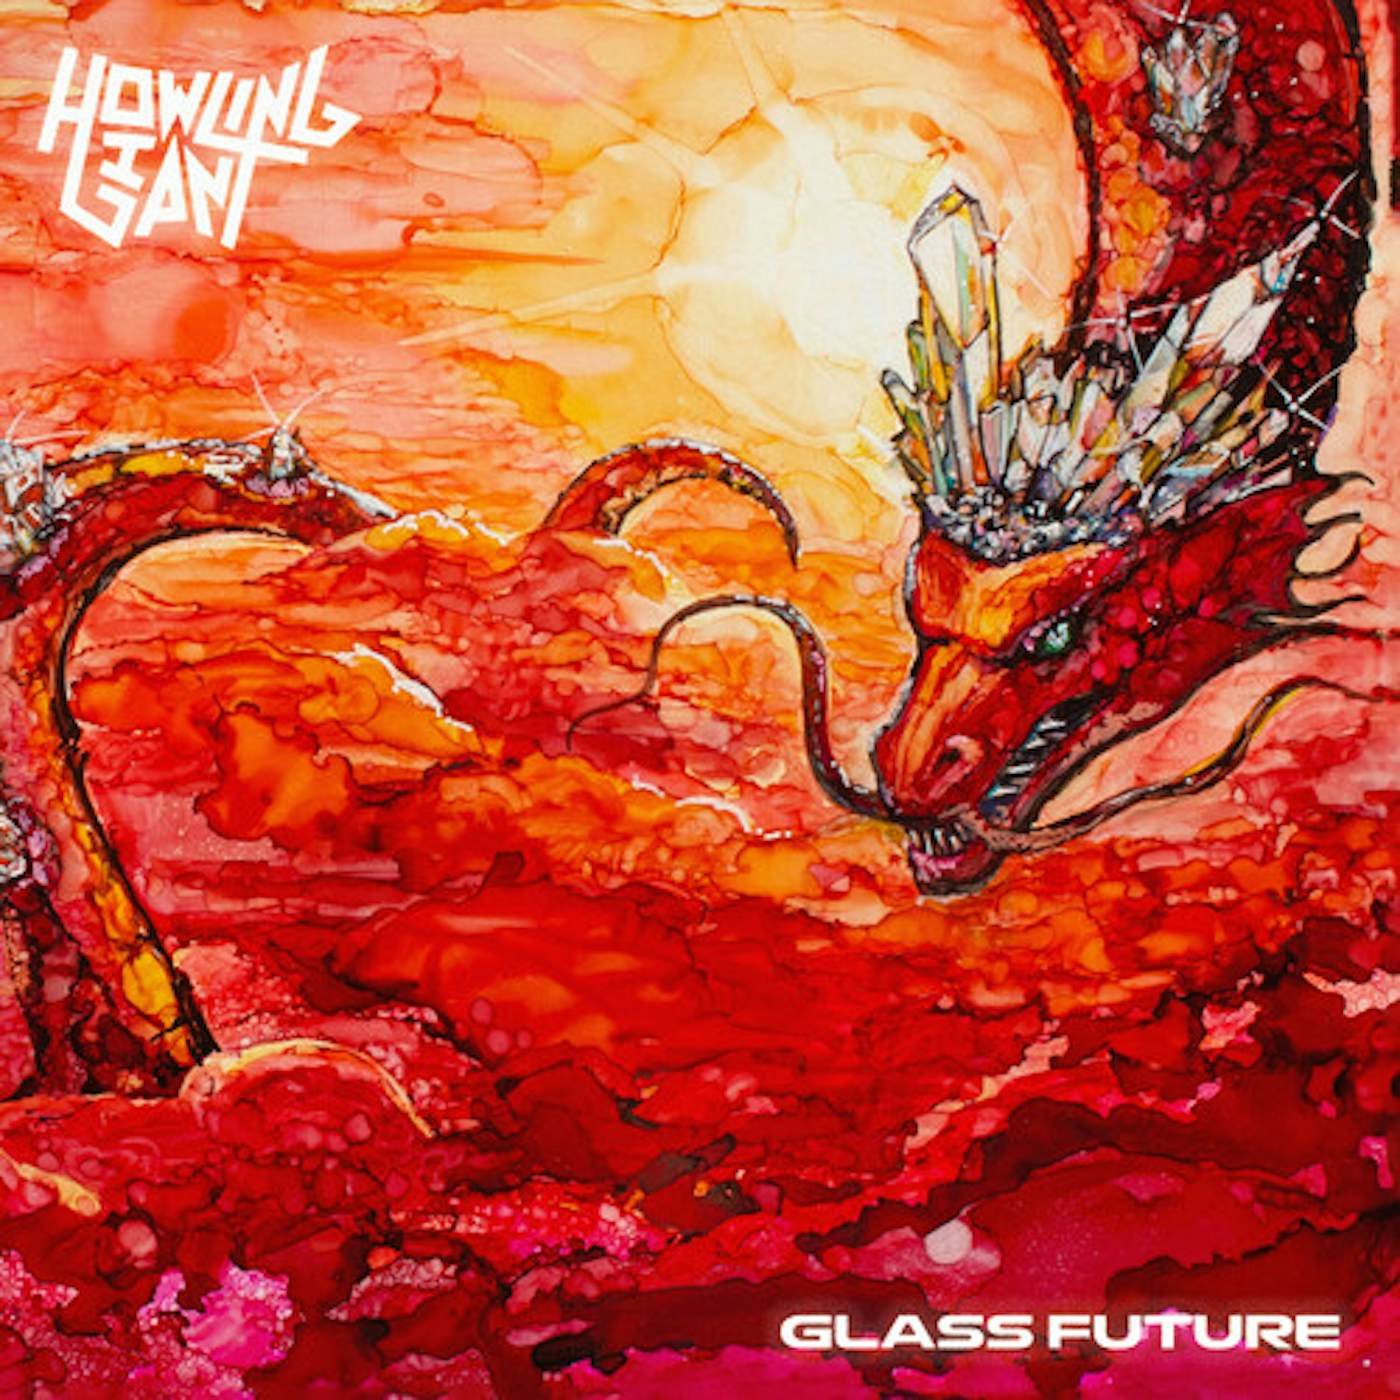 Howling Giant GLASS FUTURE CD